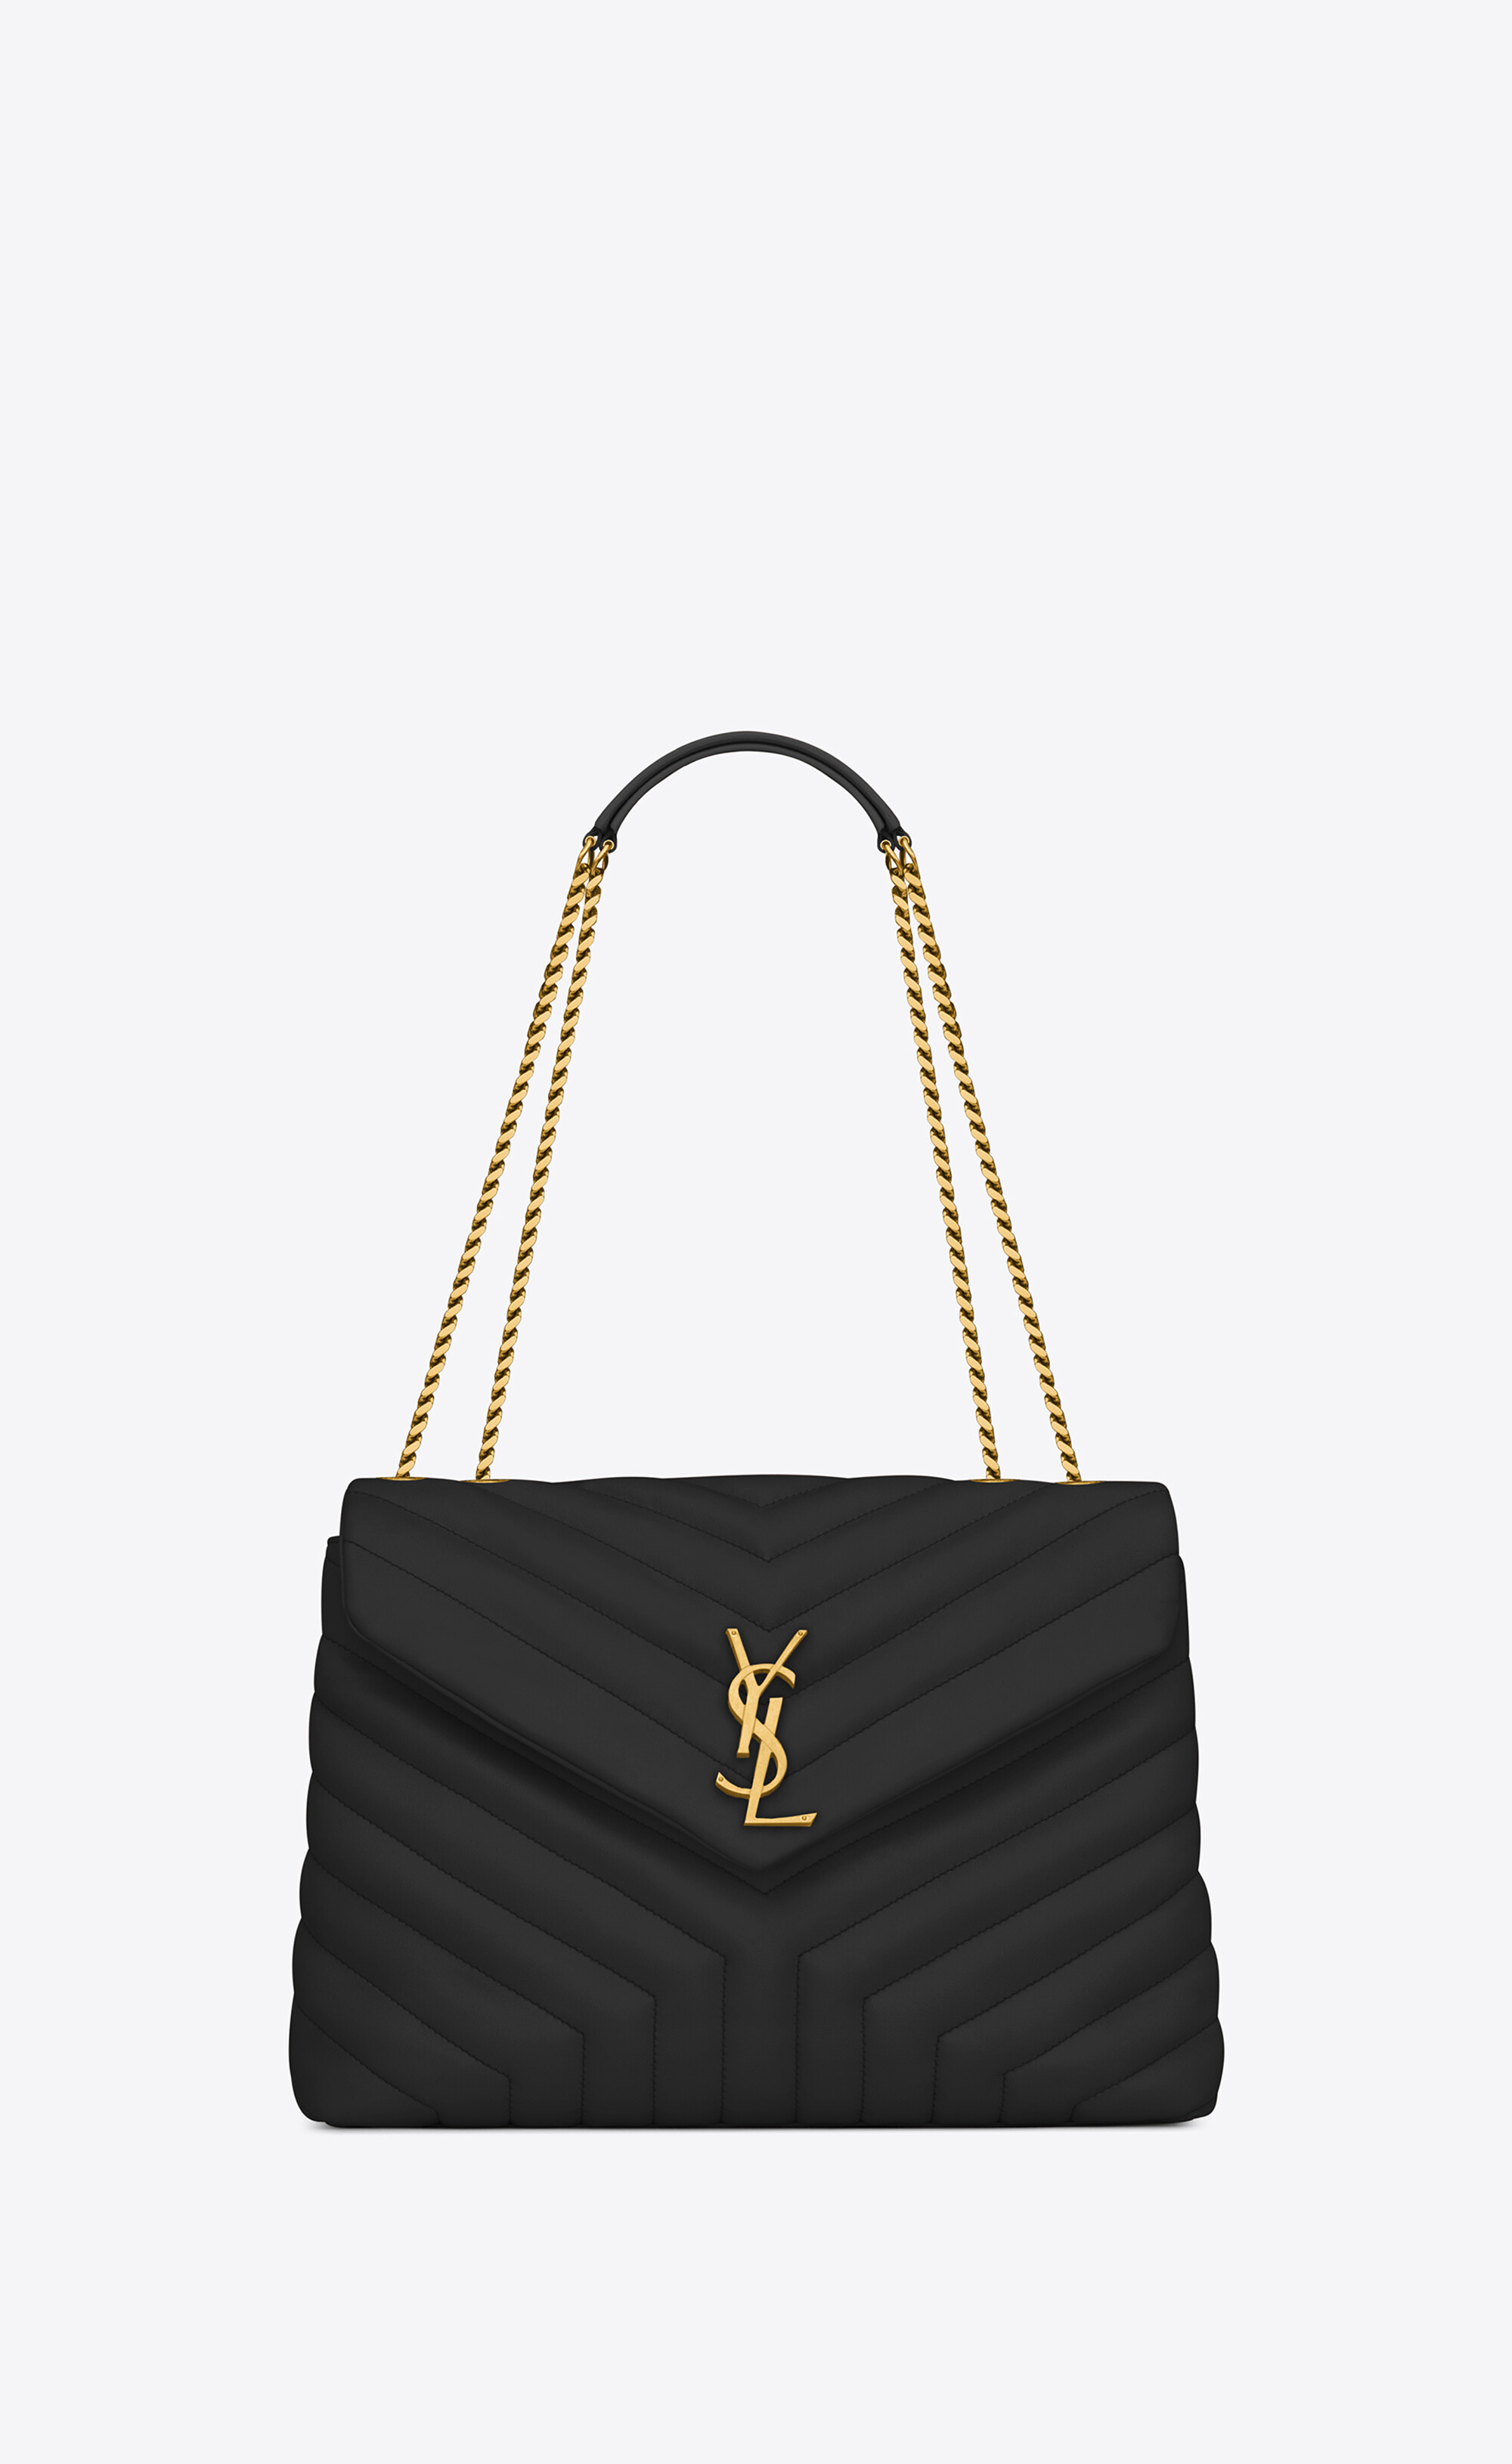 Corrupt Throb Asser LOULOU MEDIUM CHAIN BAG IN QUILTED "Y" LEATHER | Saint Laurent | YSL.com